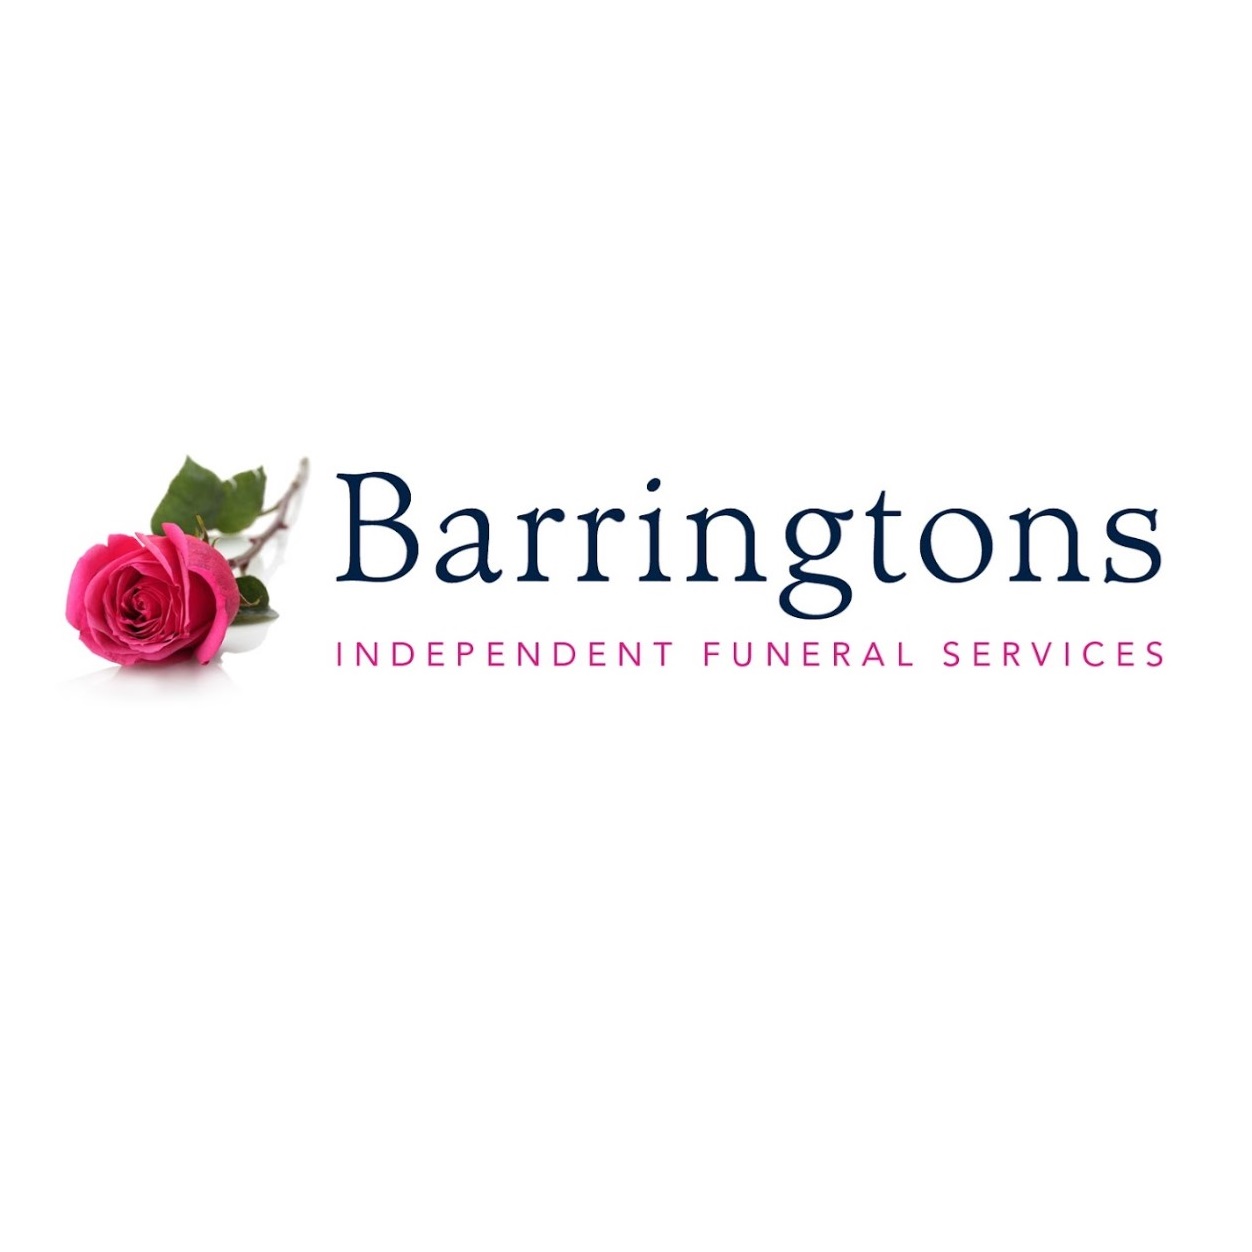 Logo of Barringtons Independent Funeral Services Funeral Services In Waterloo, Liverpool